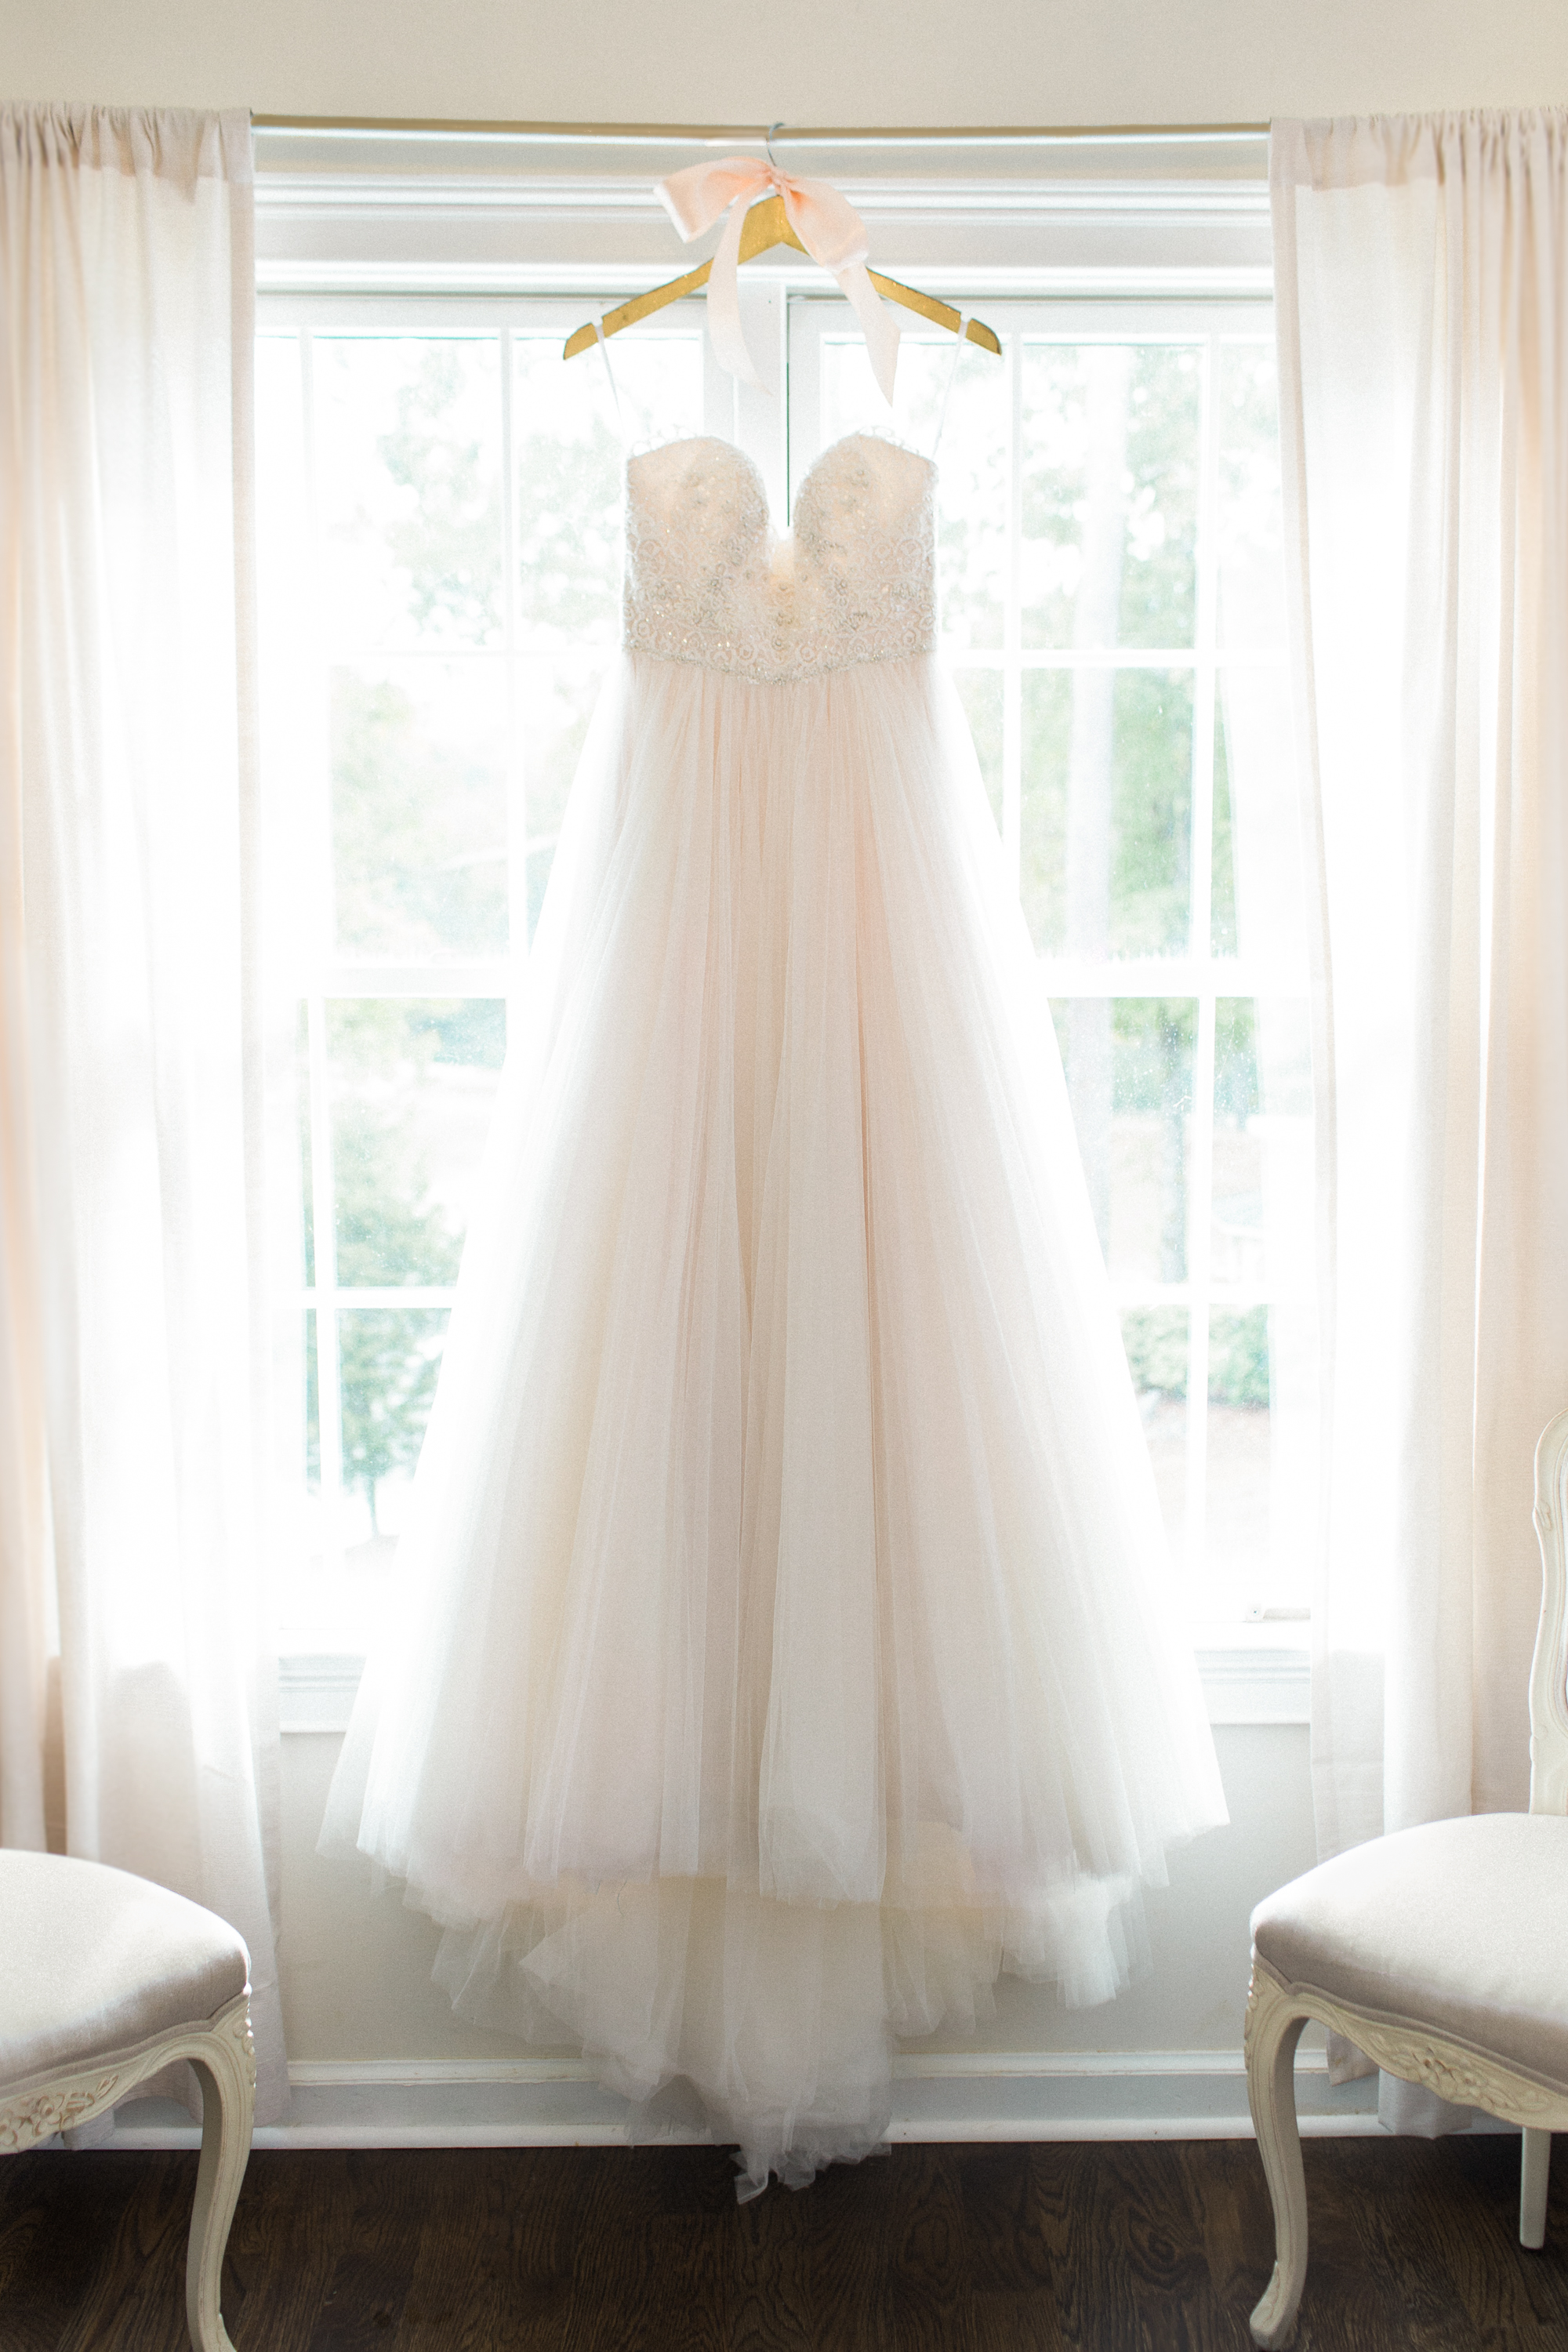 Beaded gown with tulle skirt hangs in window of Bridal Suite.